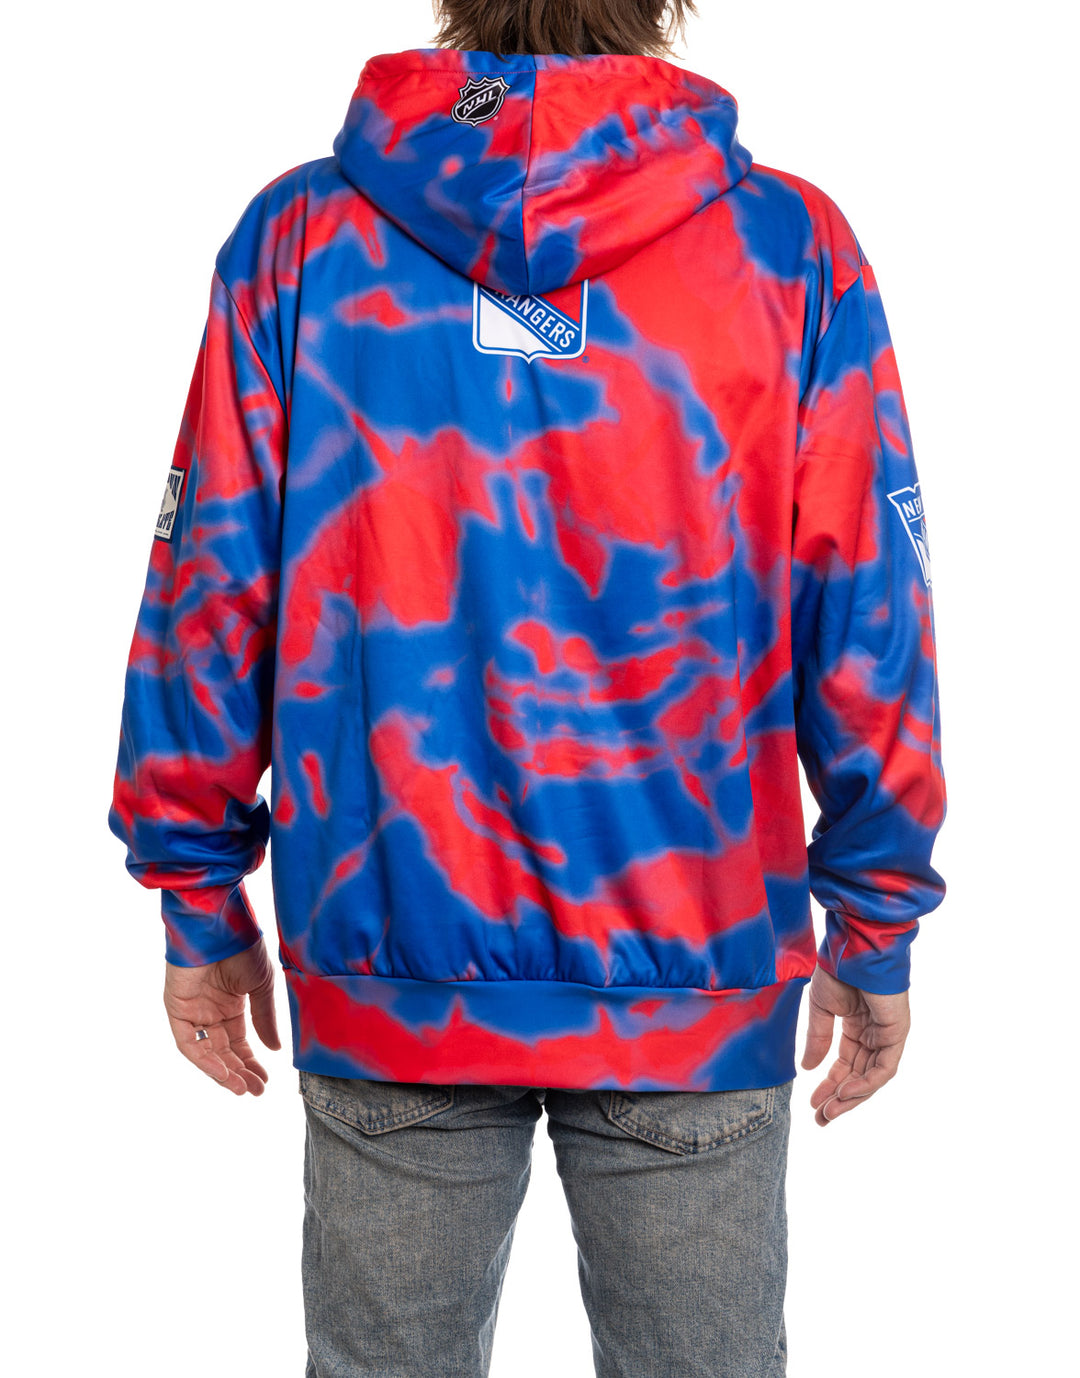 Official NHL licensed New York Rangers Tie Dye Sublimation Hoodie